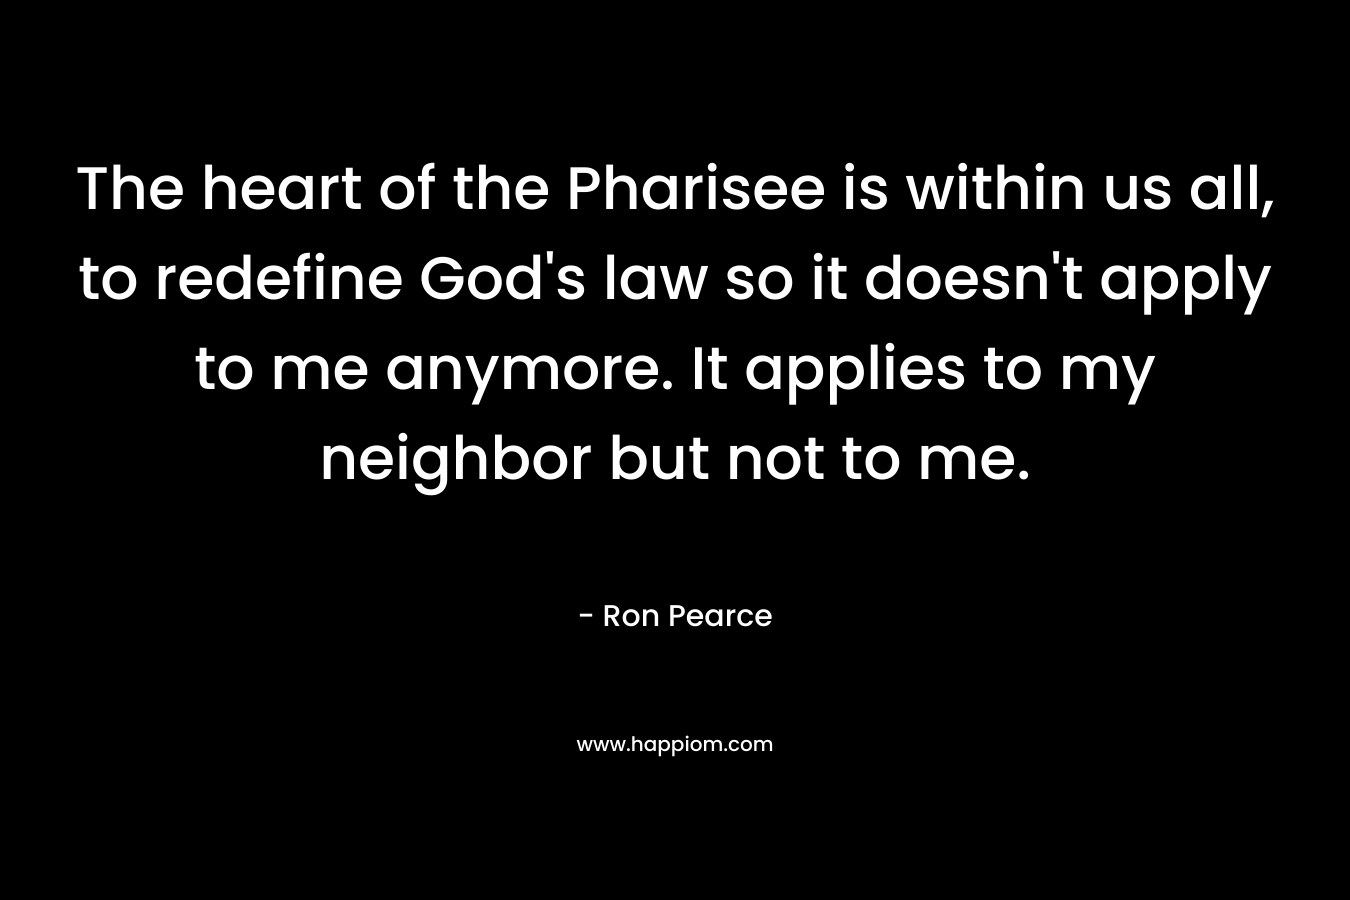 The heart of the Pharisee is within us all, to redefine God's law so it doesn't apply to me anymore. It applies to my neighbor but not to me.